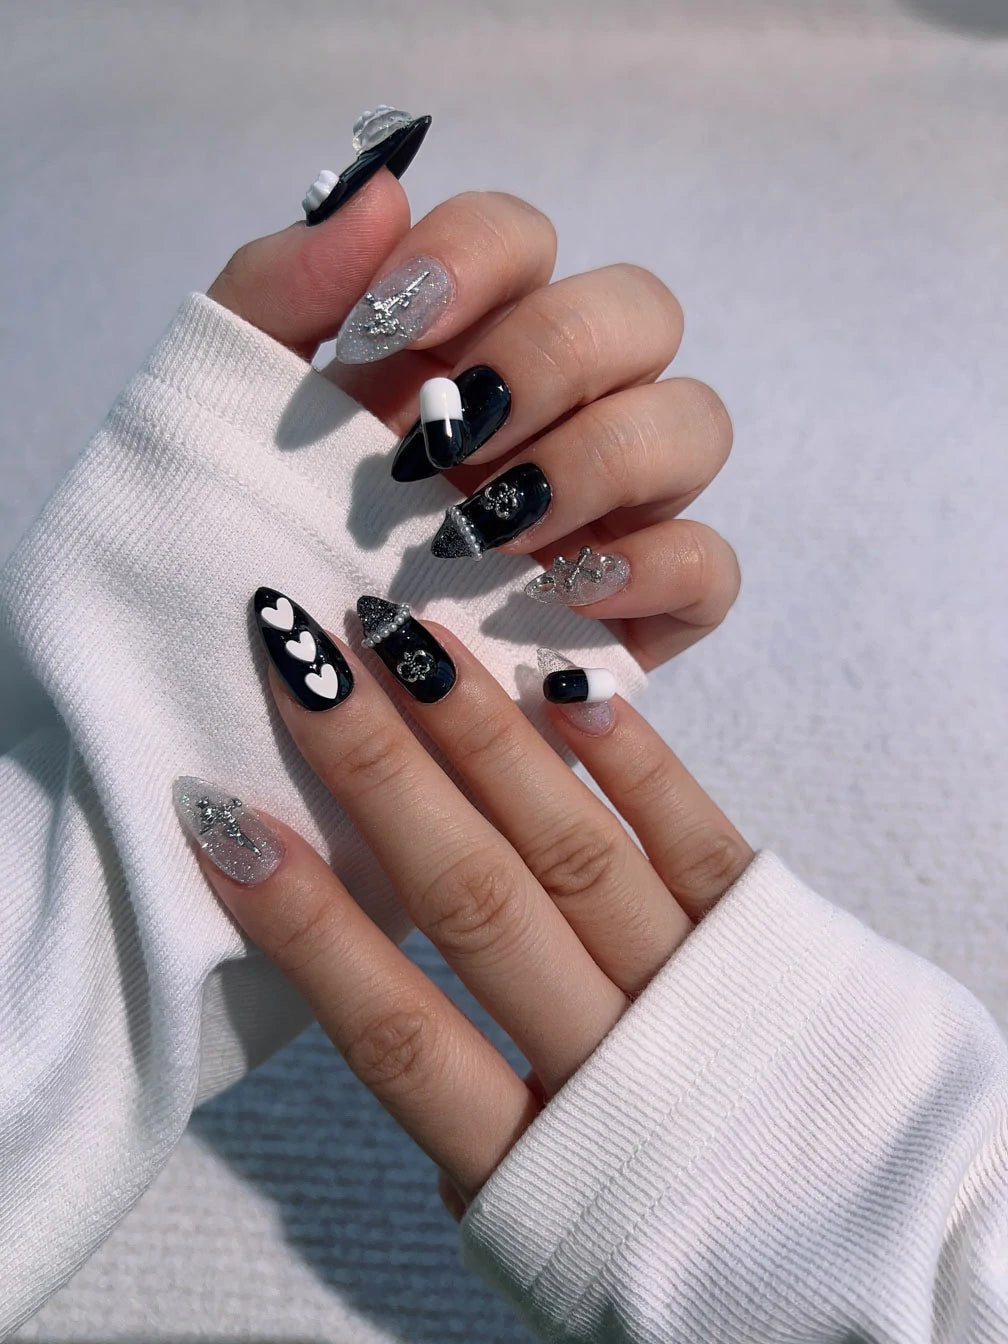 Joyee-handmade-press-on-nails-edgy-pill-med-almond-nail-hands-on-picture-2